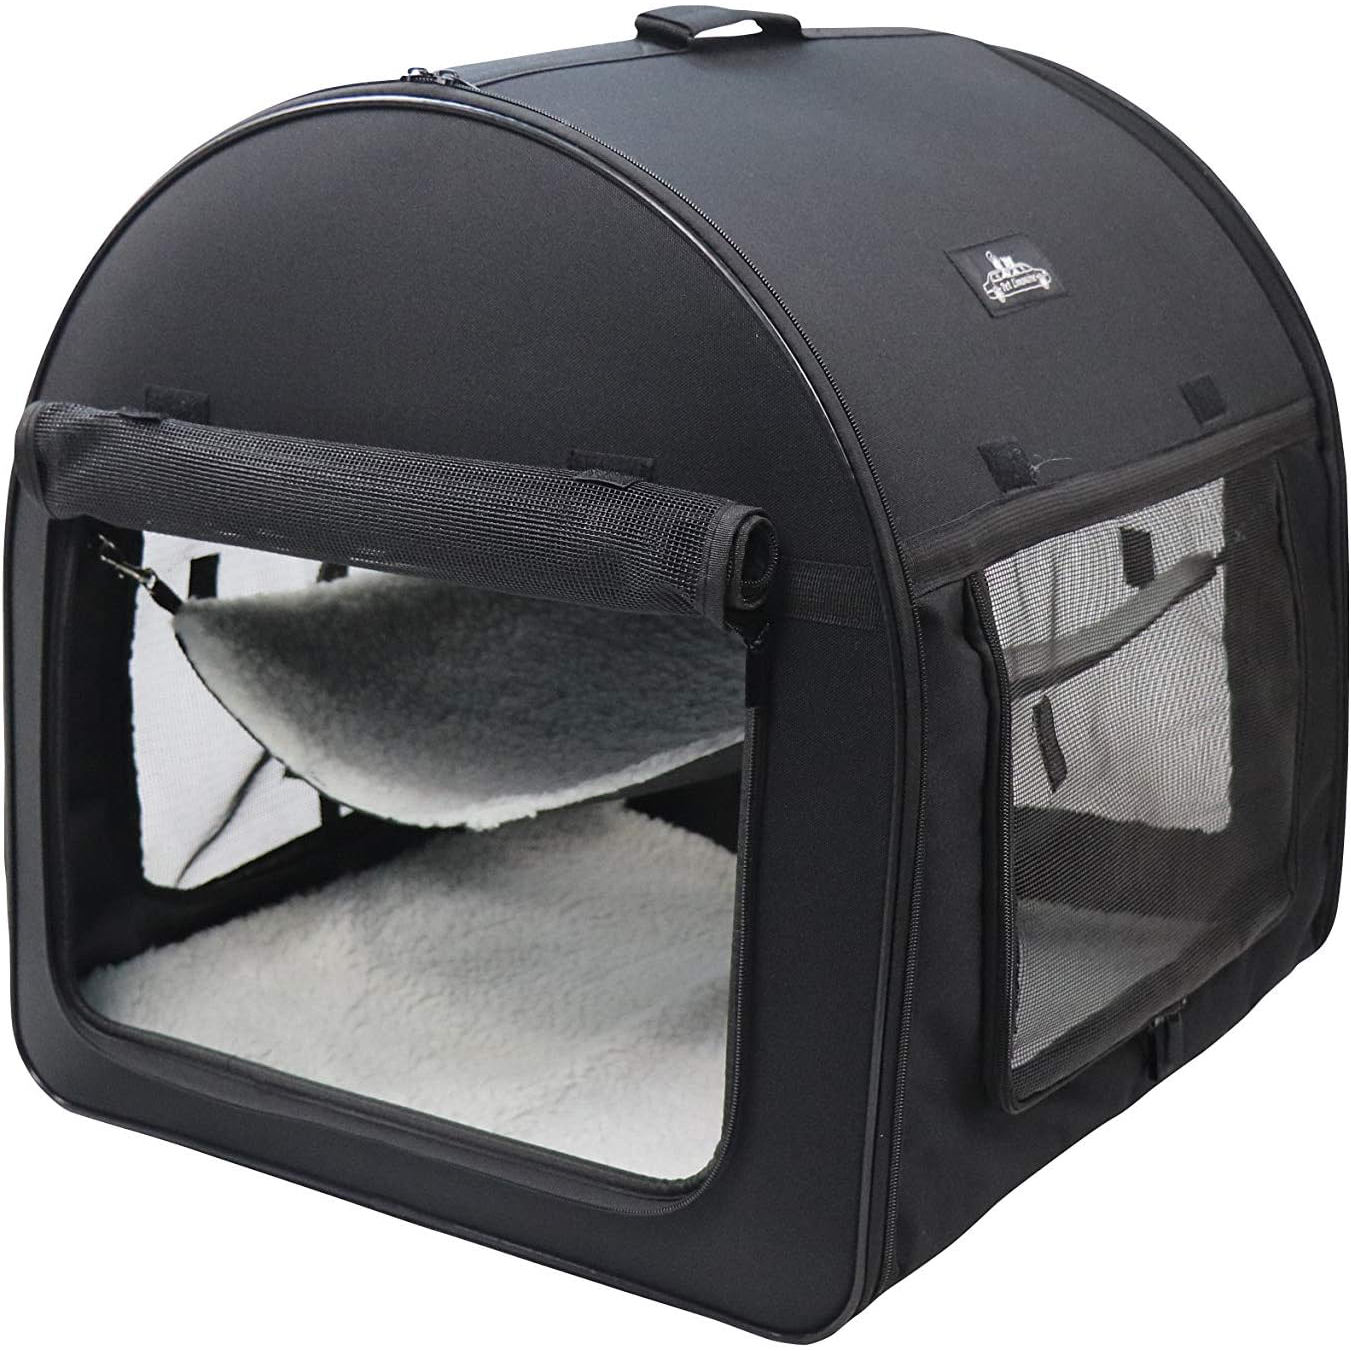 Soft Dog Cat Crate The Portable 2-in-1 Double Travel Kennel Tube Carrier for All Pets Car Seat Ready